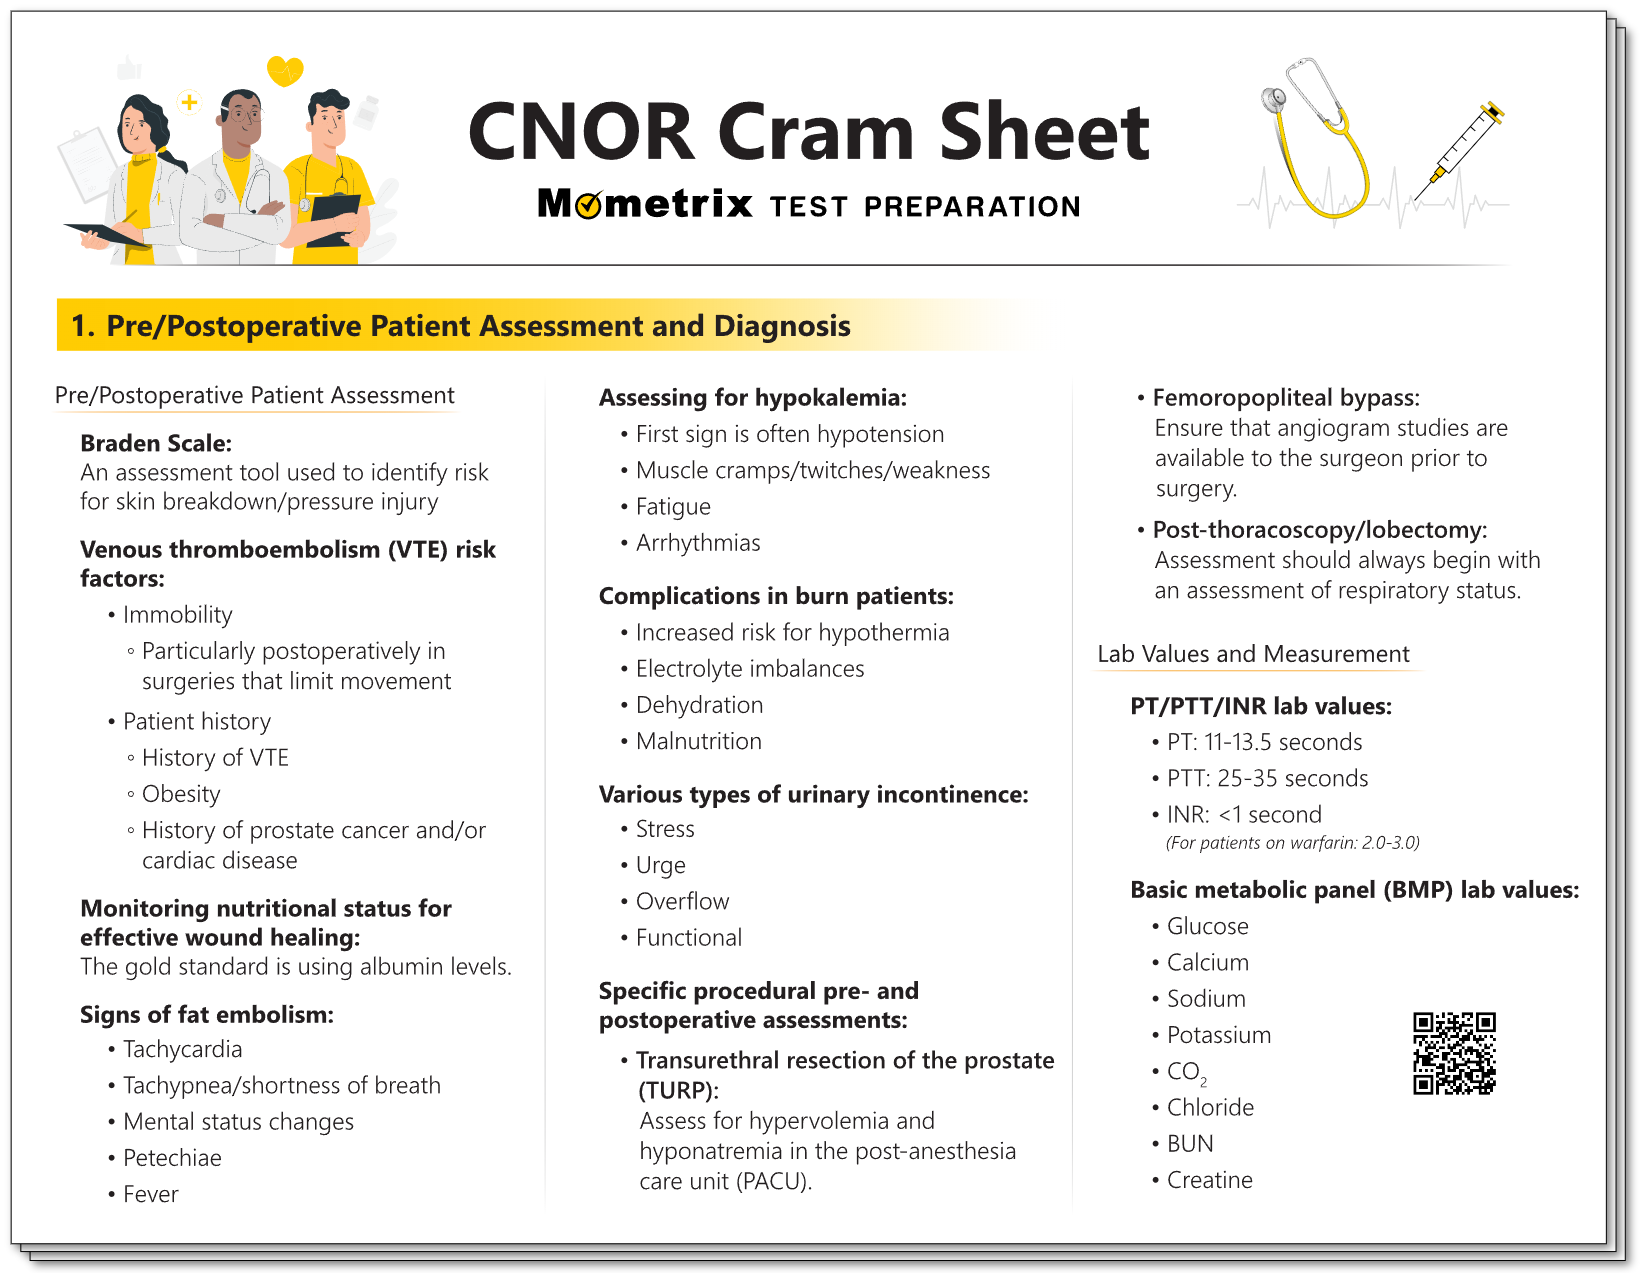 An image link to the CNOR cram sheet.